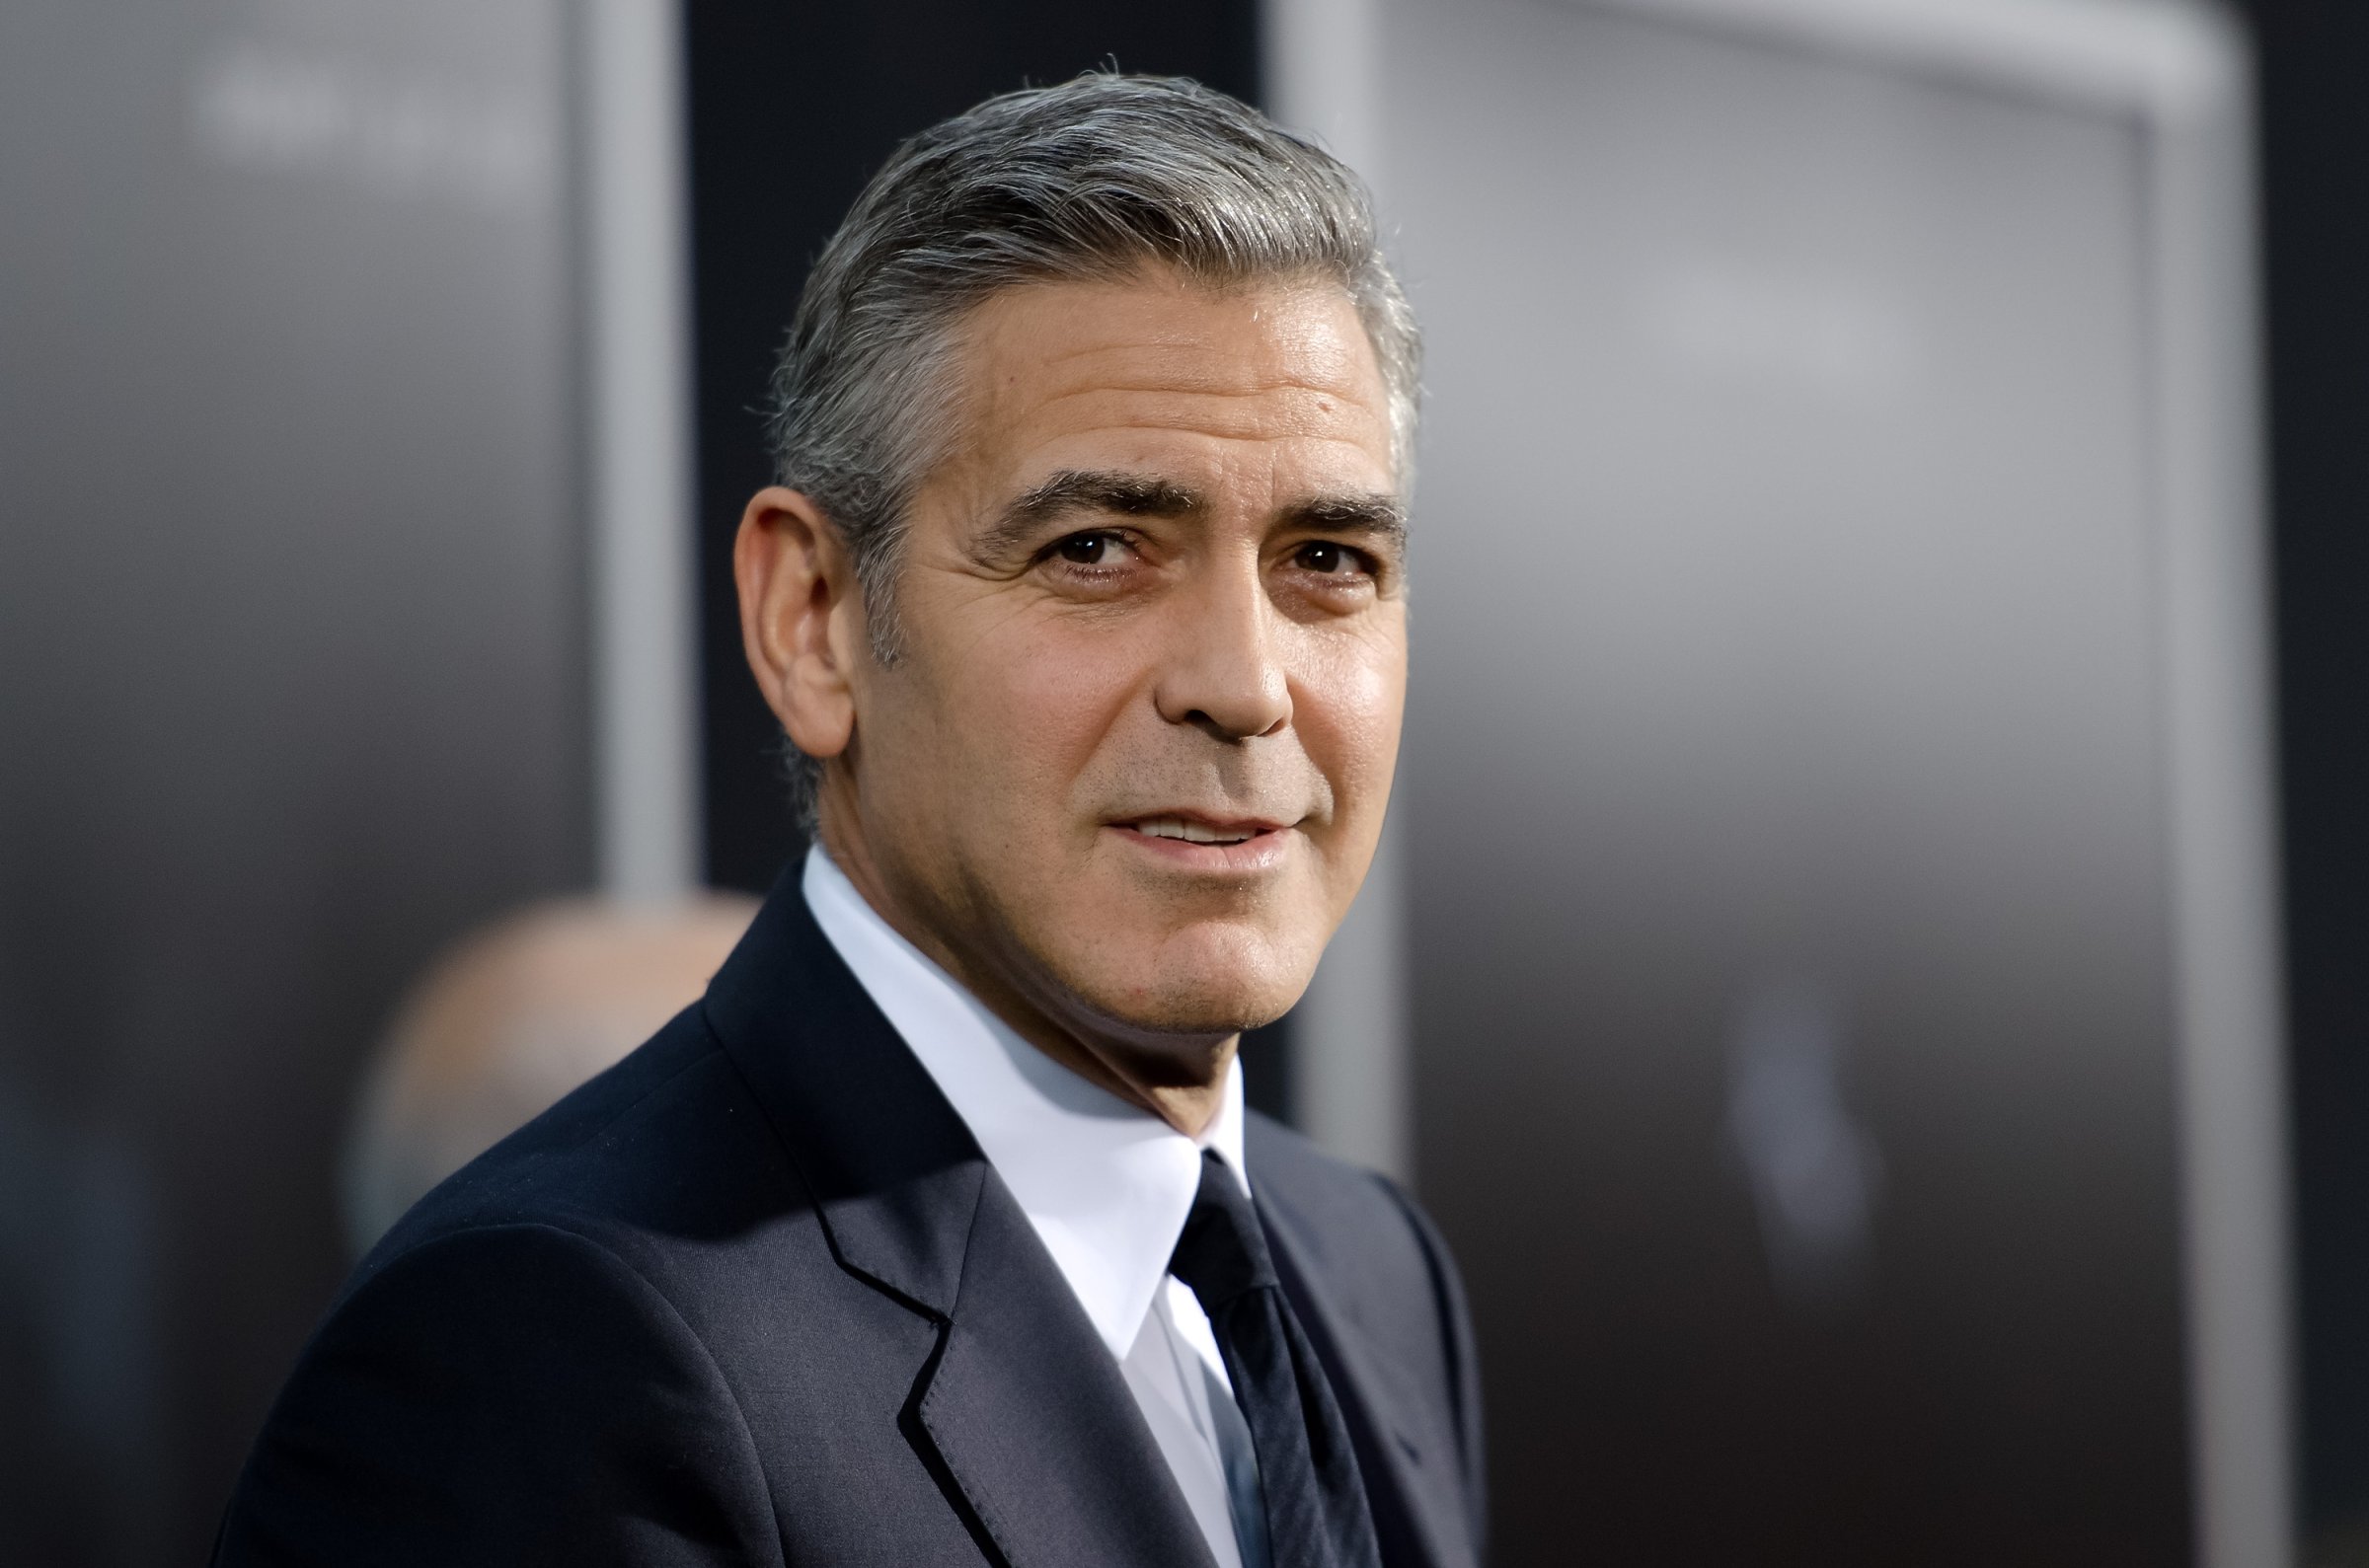 George Clooney attends the "Gravity" New York premiere at AMC Lincoln Square Theater on October 1, 2013 in New York City.